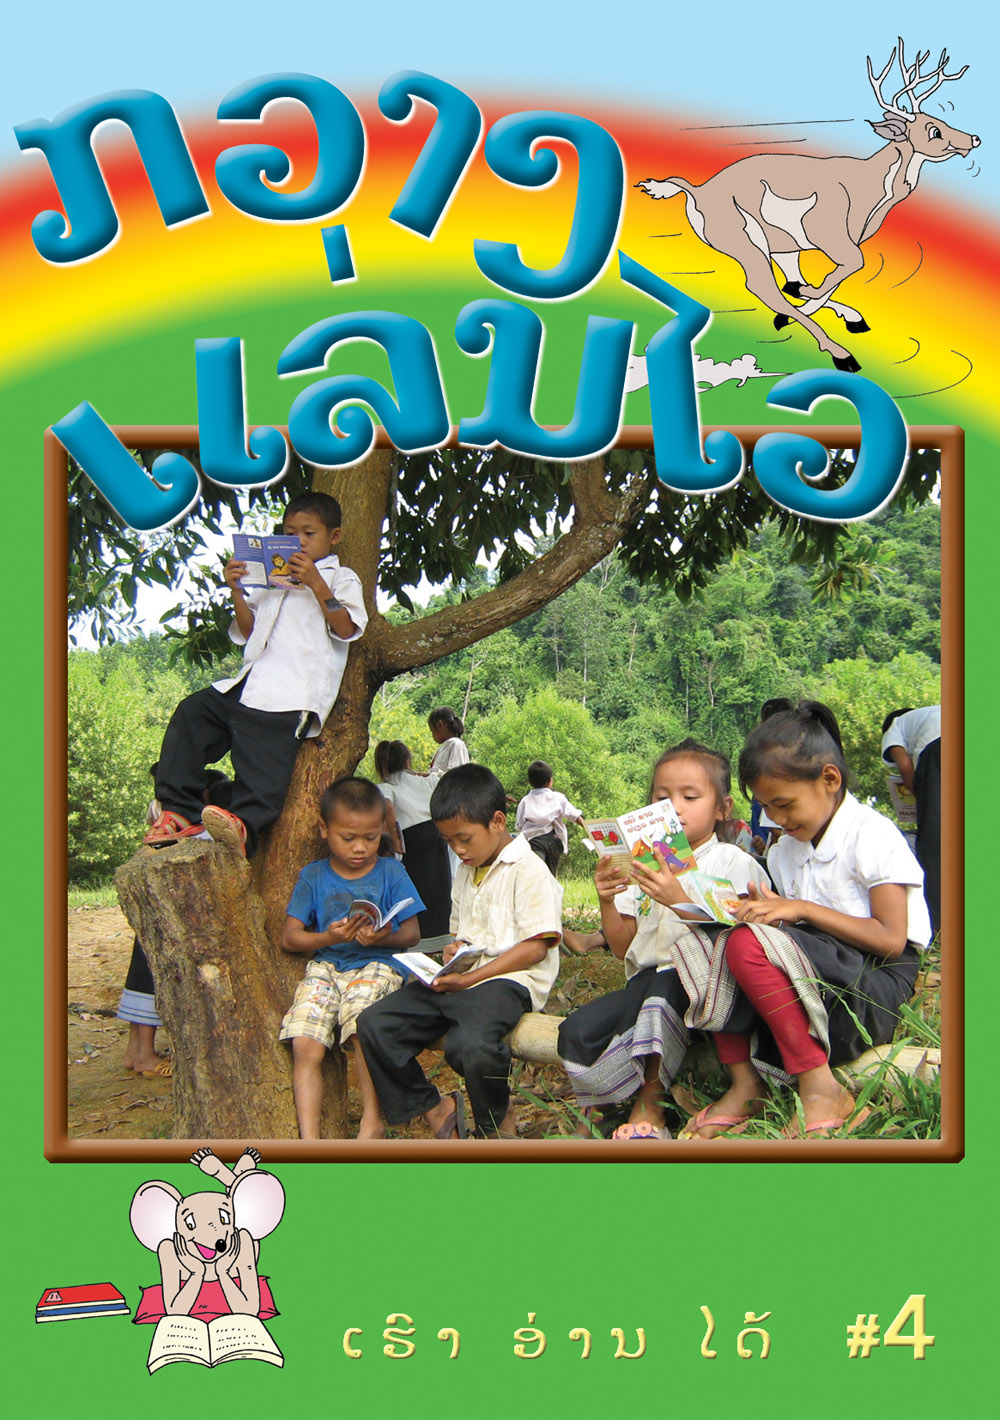 I Can Read! #4: The Deer Runs Fast large book cover, published in Lao language